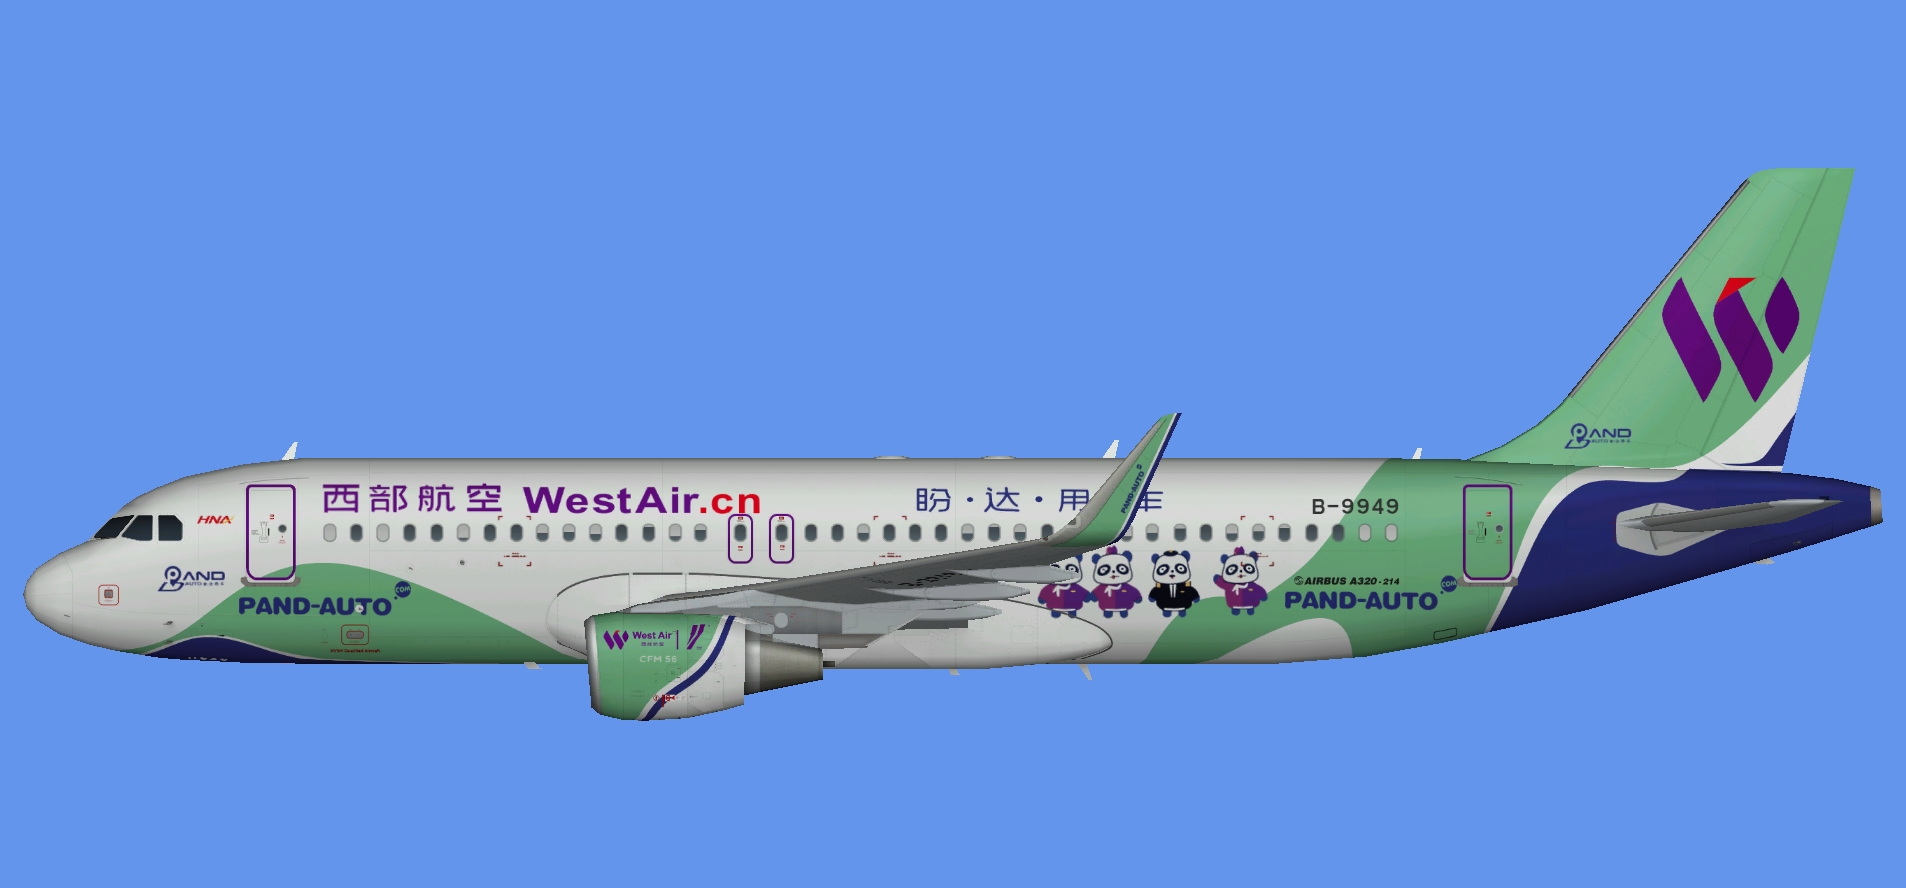 West Air A320 Pand Auto